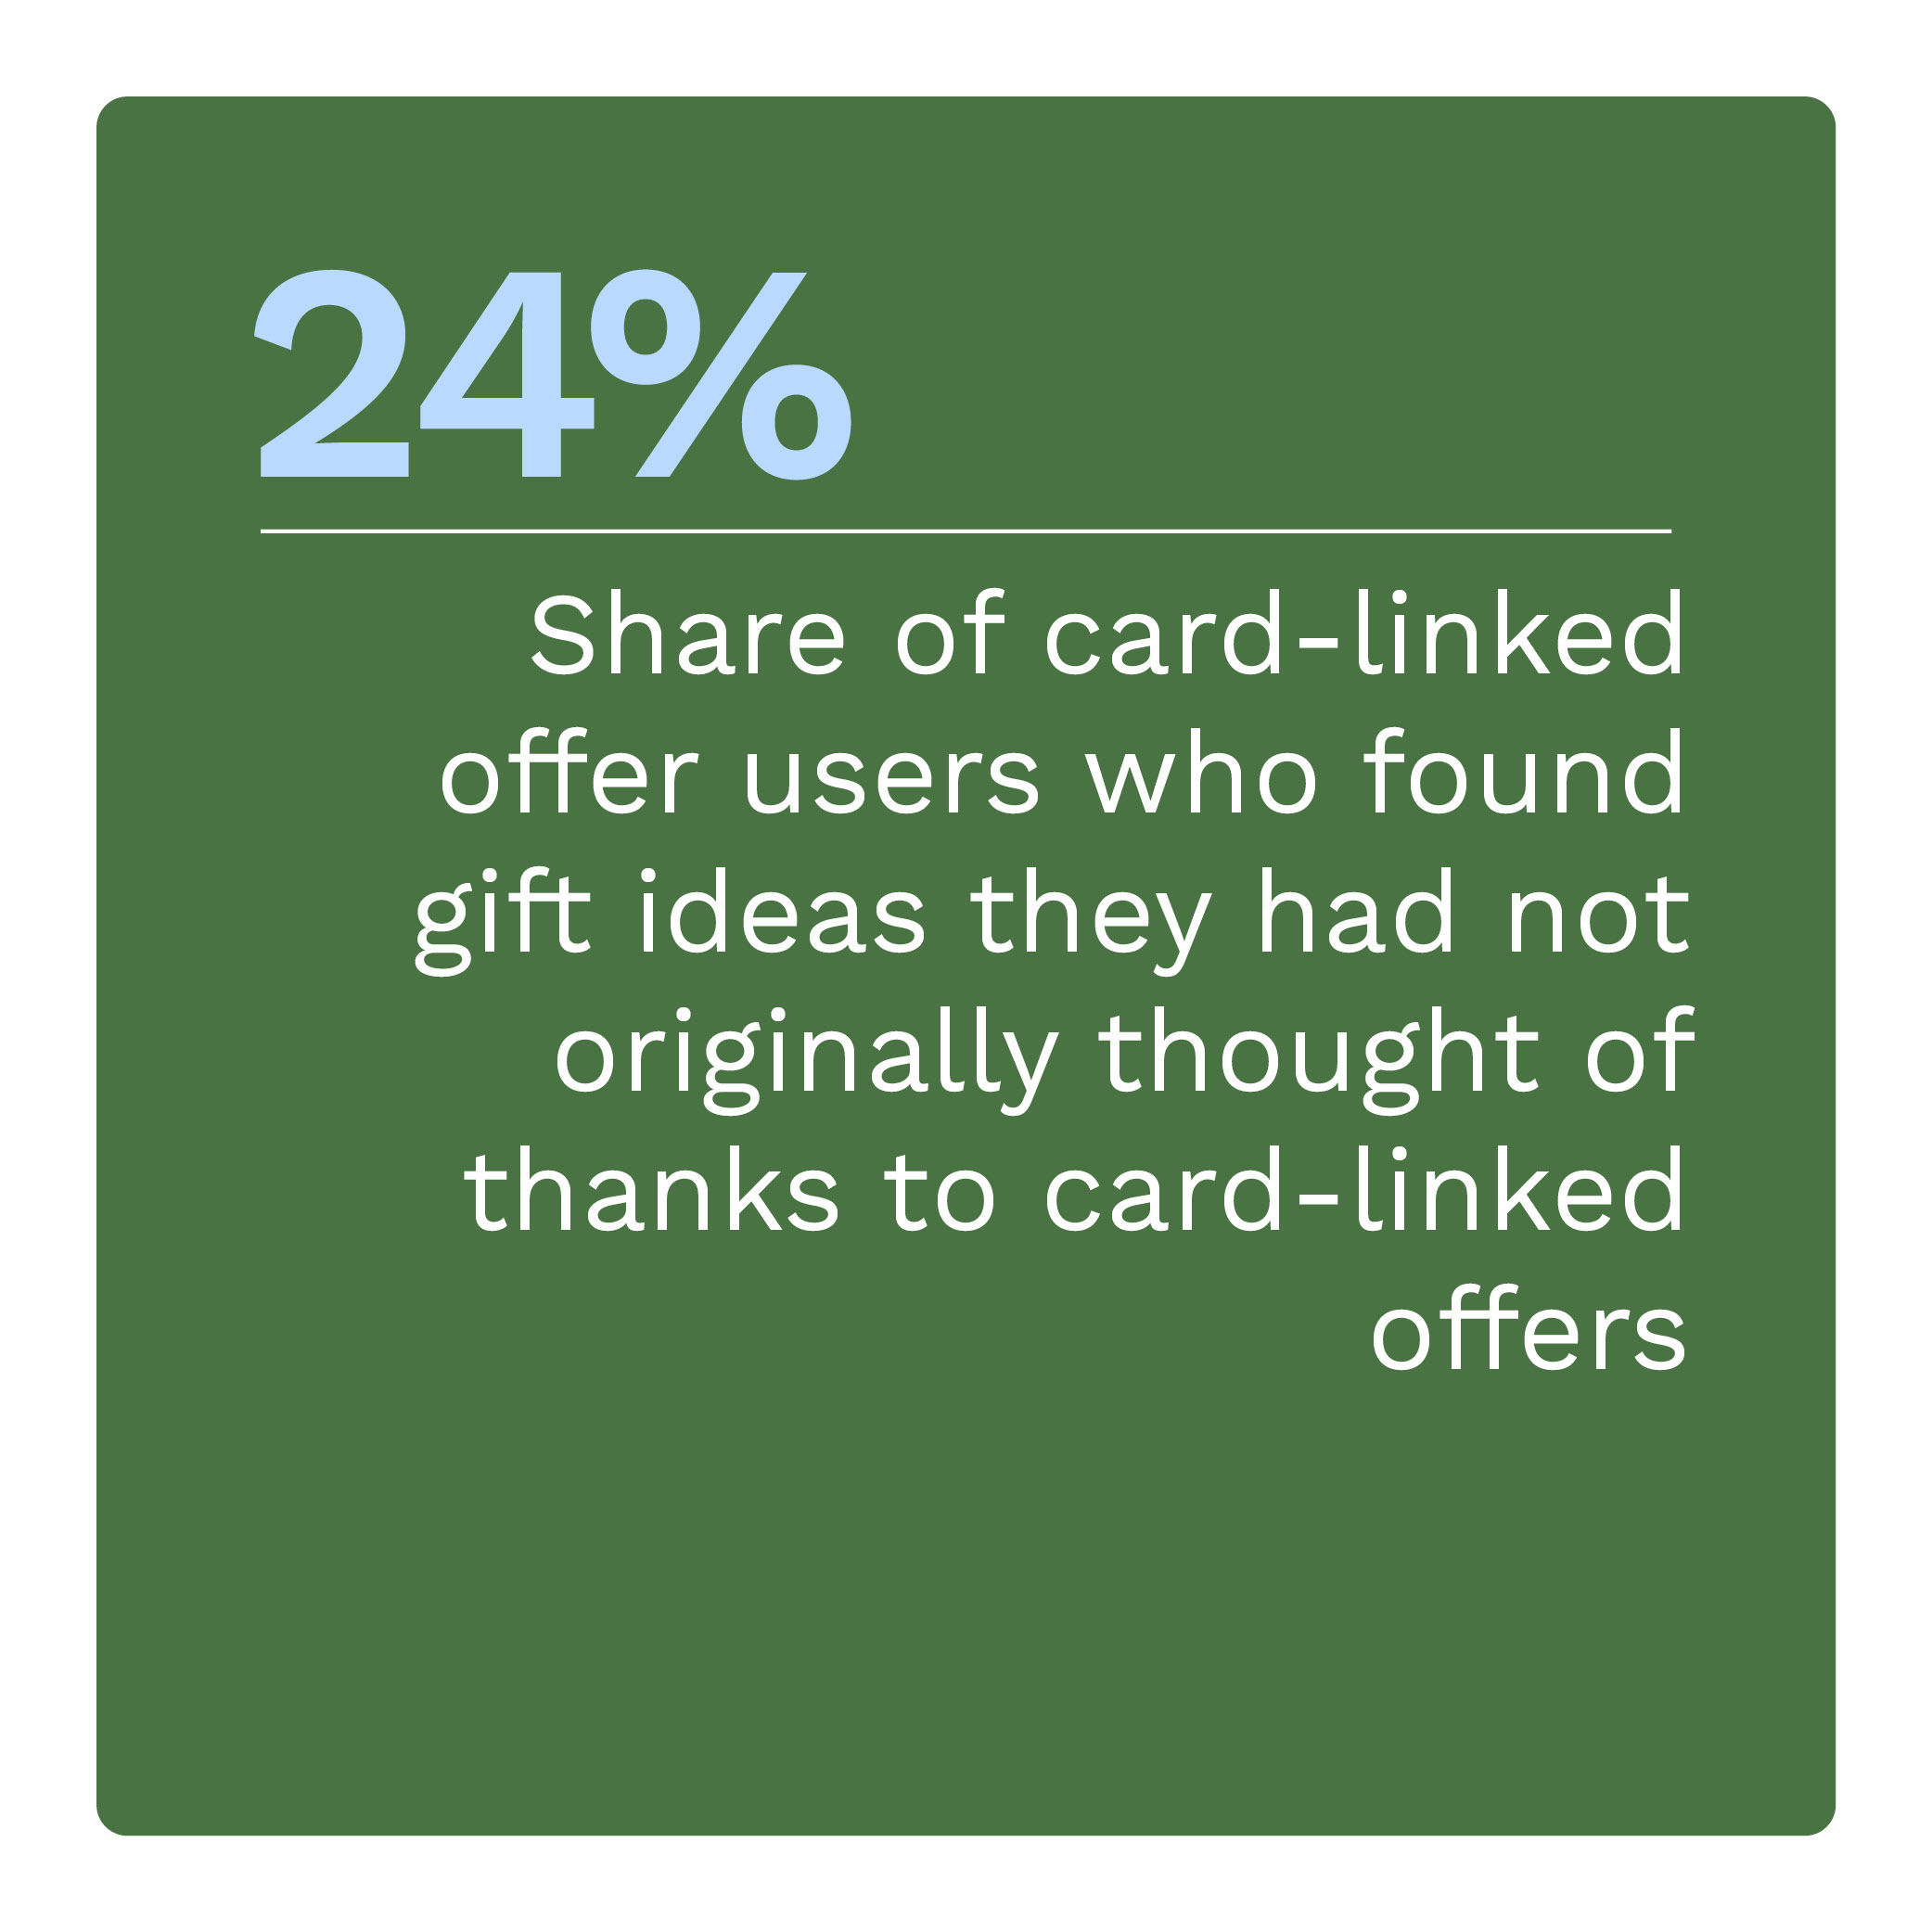  Share of card-linked offer users who found gift ideas they had not originally thought of thanks to card-linked offers